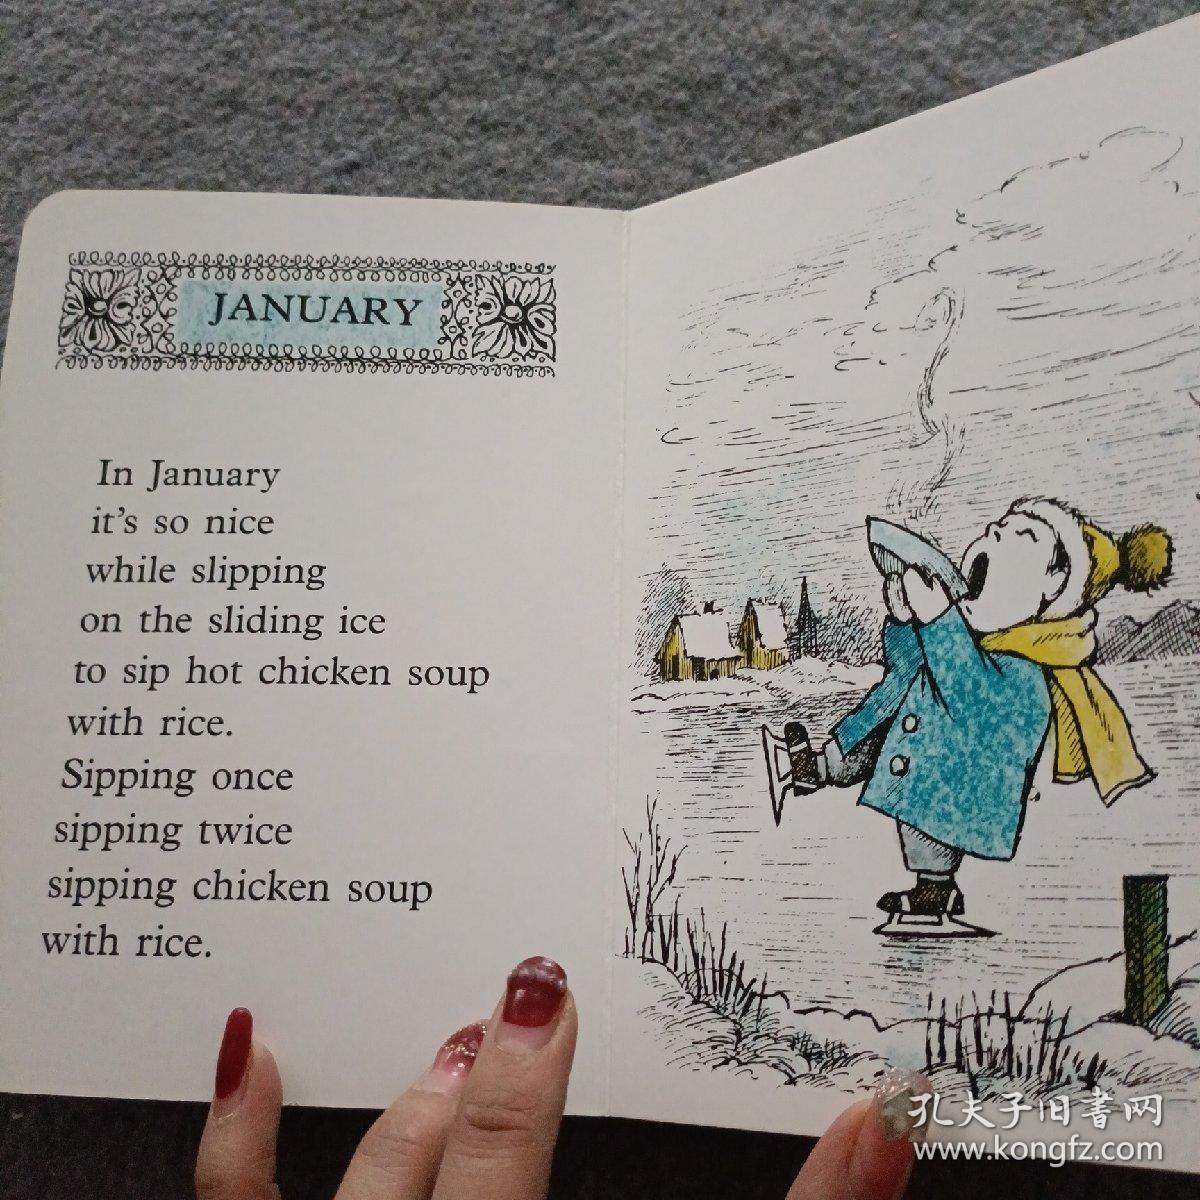 Chicken Soup with Rice : A Book of Months